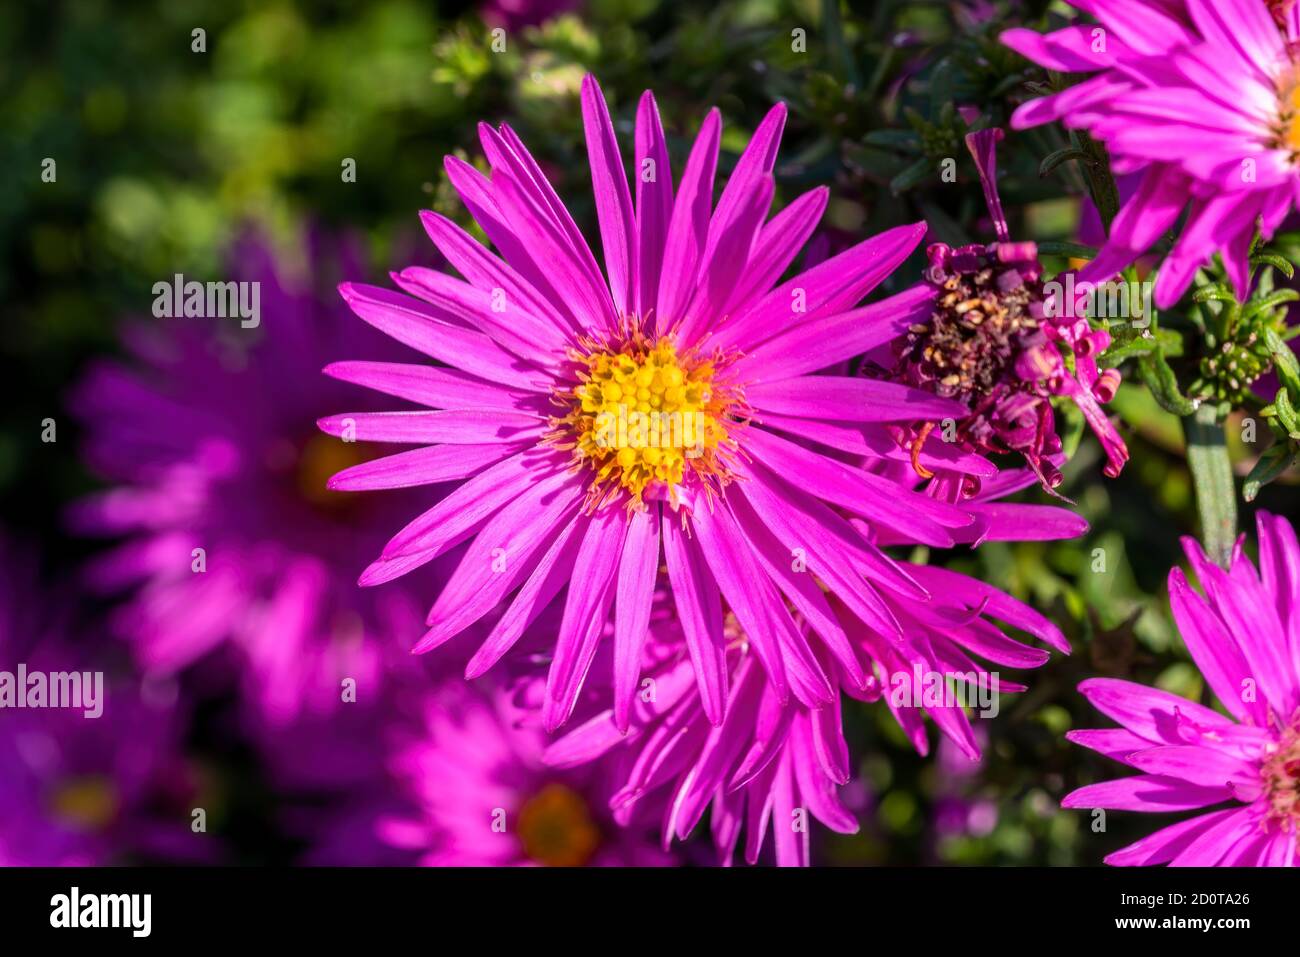 Aster novi belgii 'Dandy' a magenta pink herbaceous summer autumn perennial flower plant commonly known as Michaelmas daisy stock photo image Stock Photo